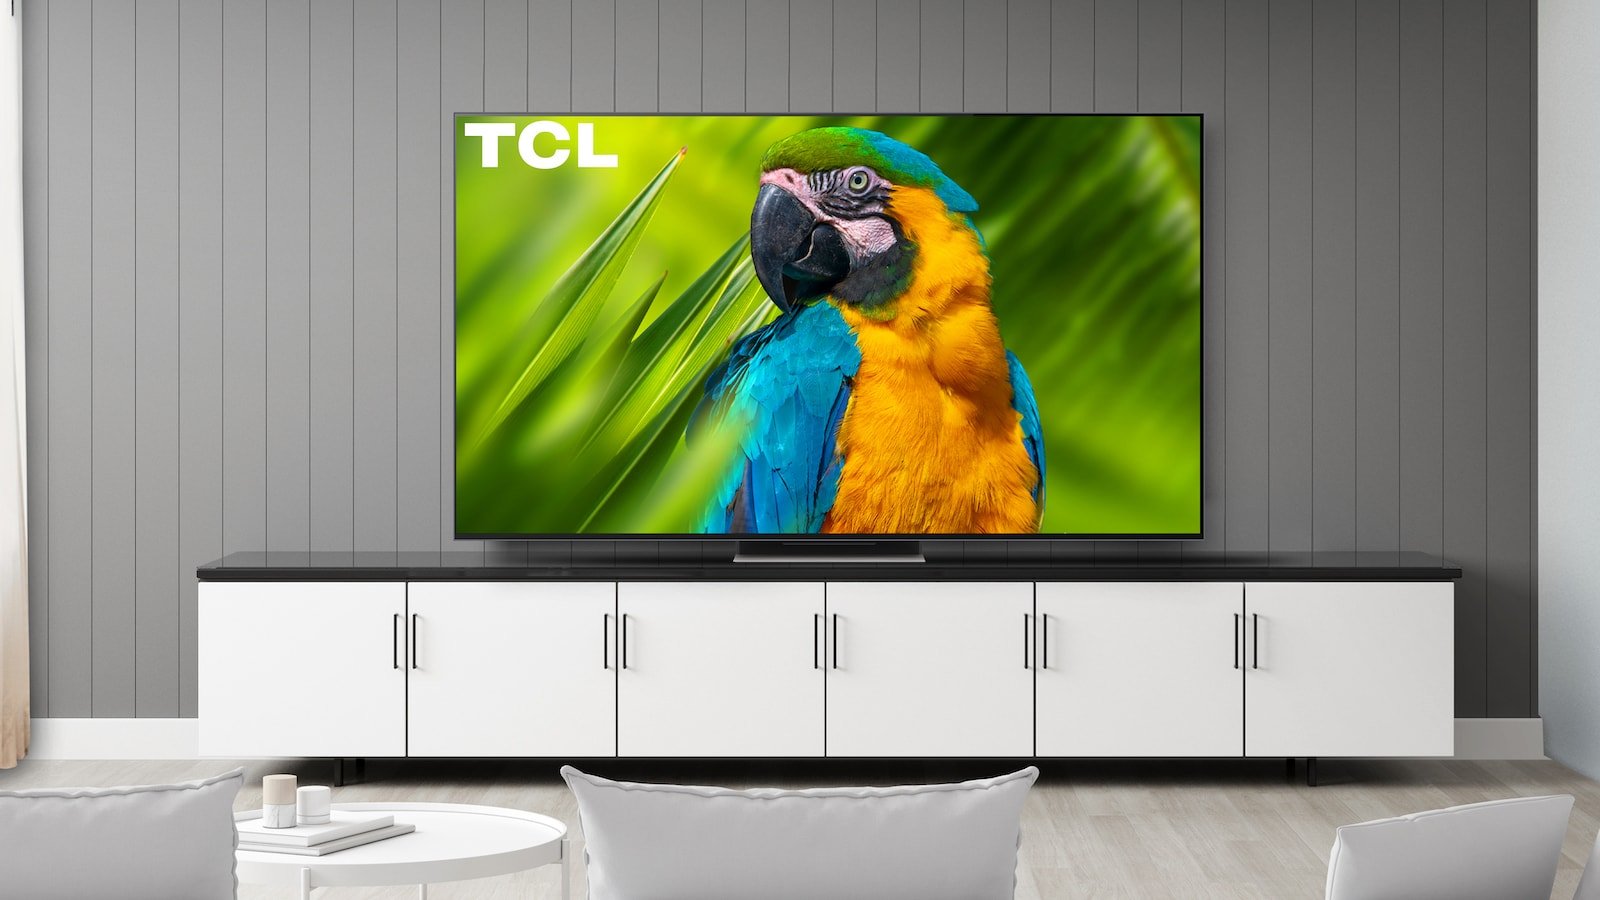 TCL Model R655 6-Series MiniLED TV offers QLED Wide Color & 4K Dolby Vision HDR quality